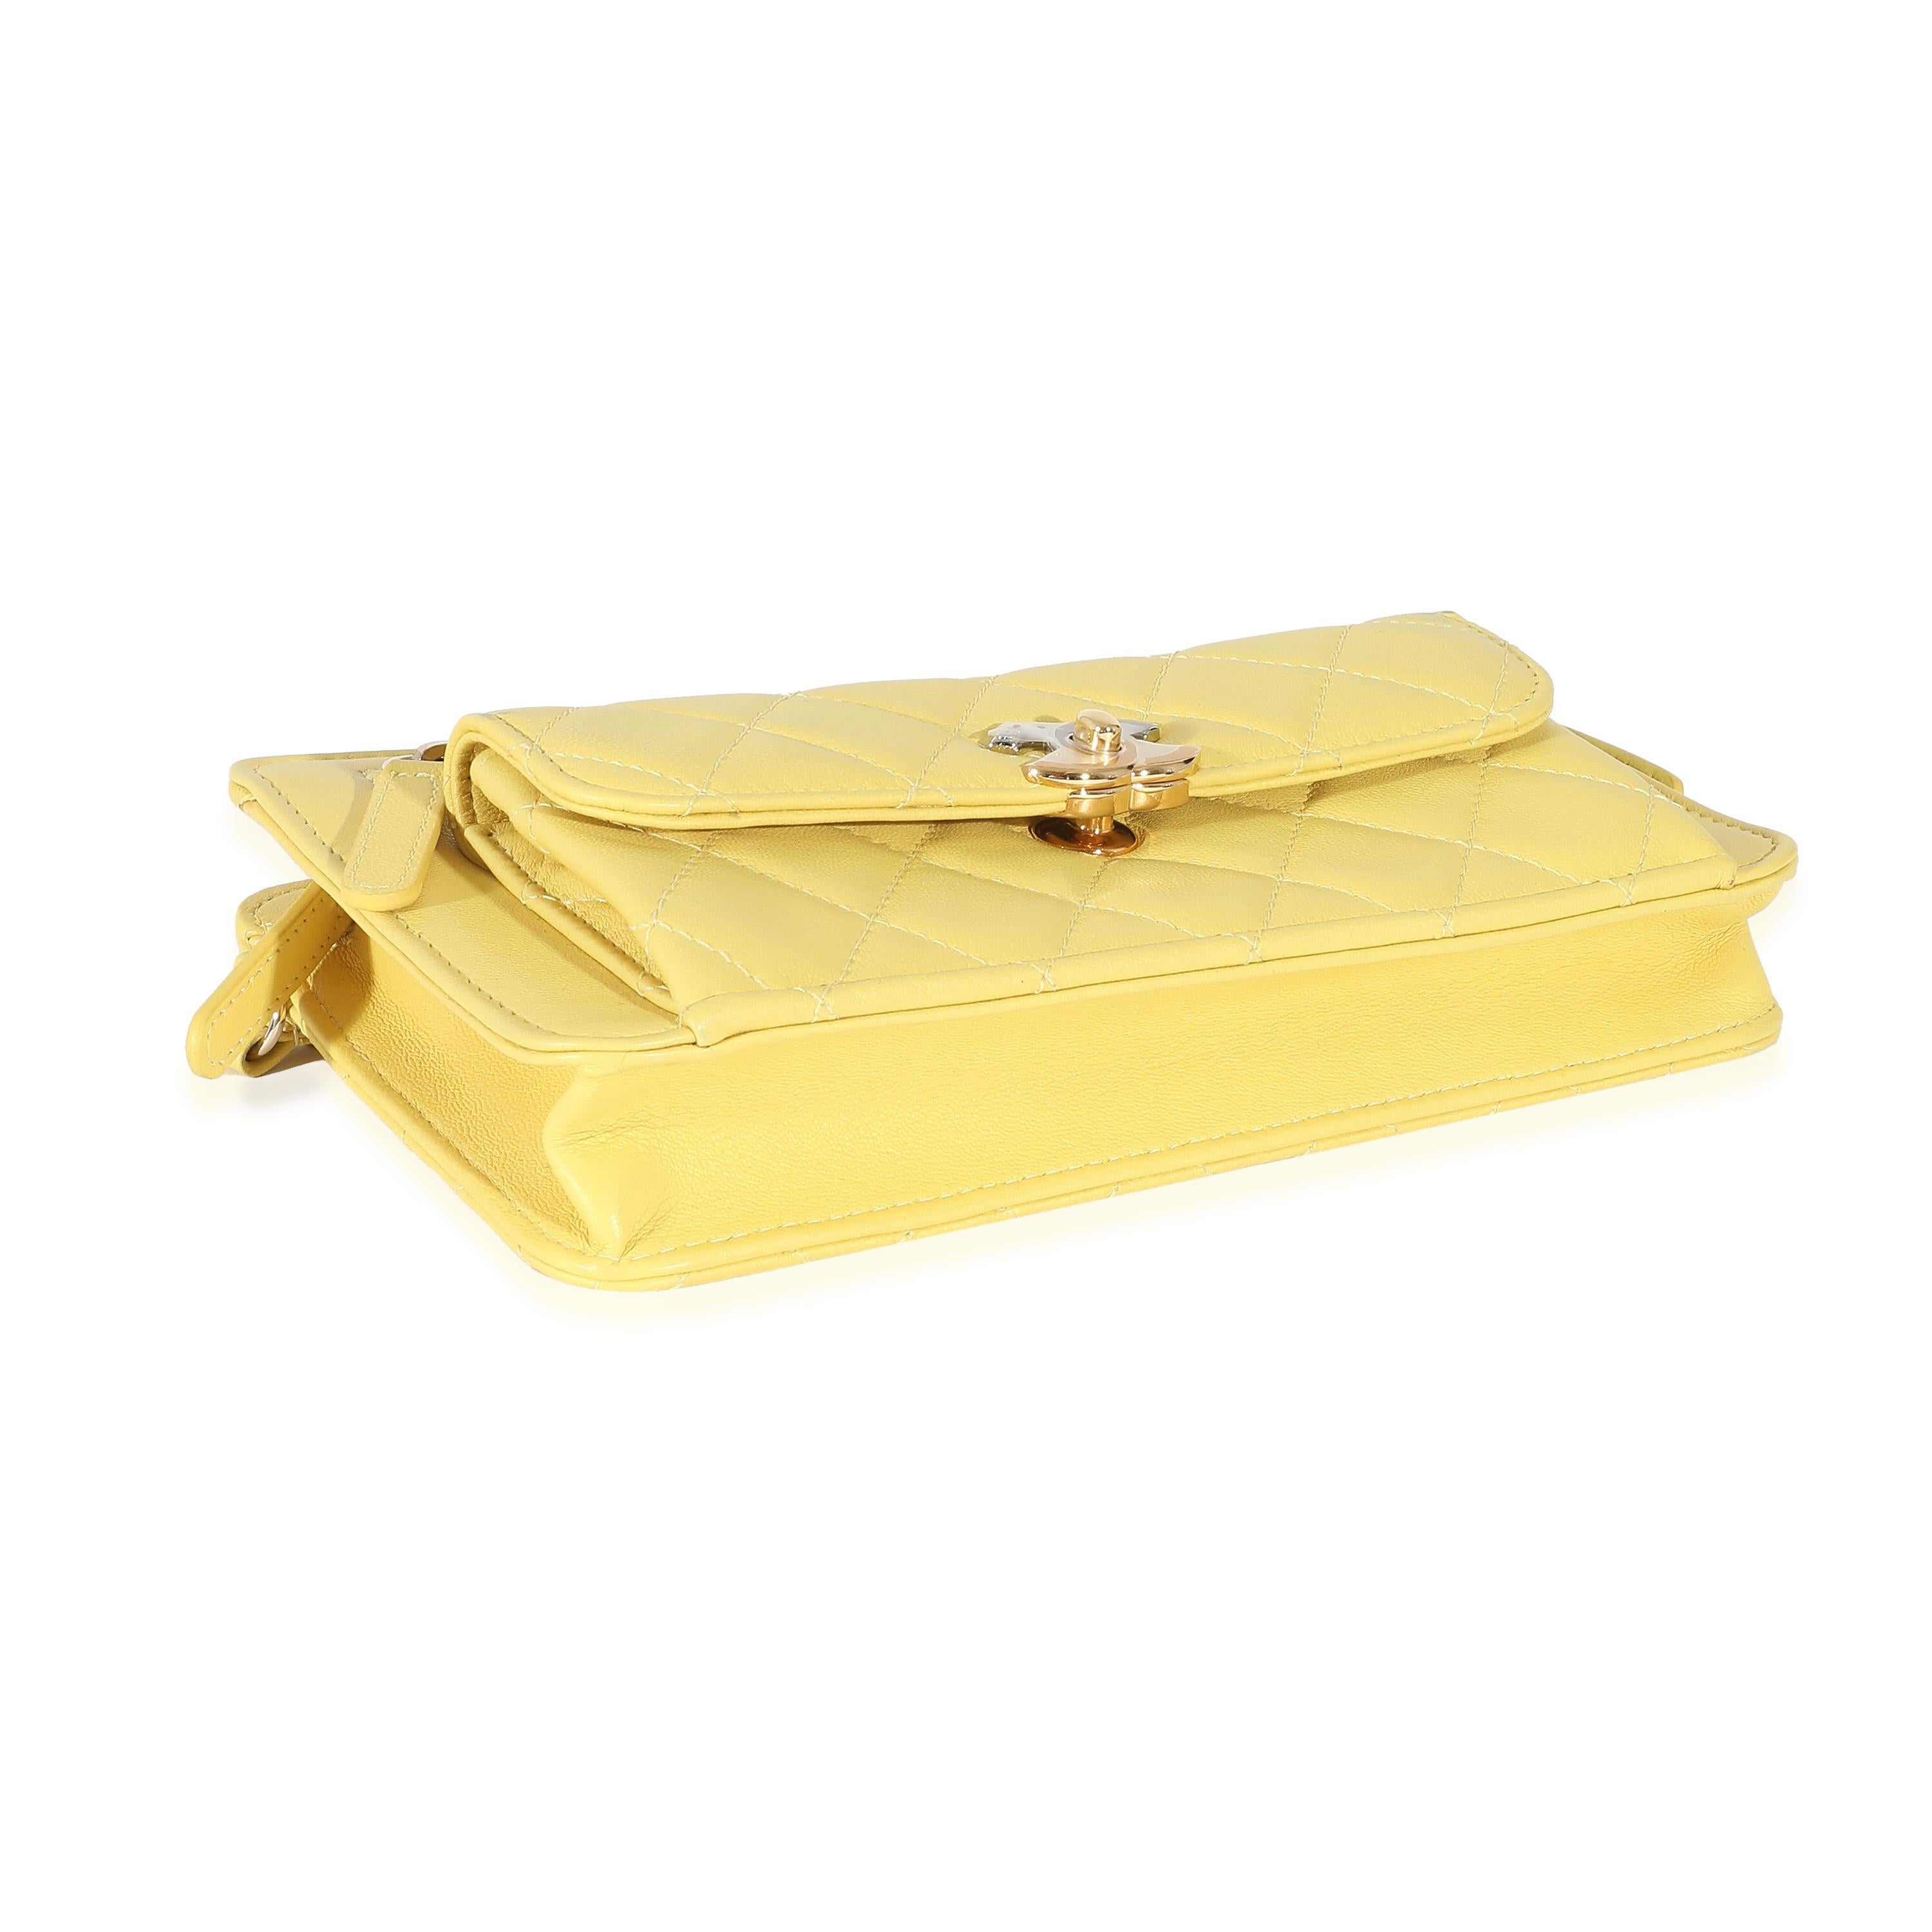 Listing Title: Chanel Yellow Lambskin Quilted Front Pocket Wristlet
SKU: 132481
Condition: Pre-owned 
Handbag Condition: Excellent
Brand: Chanel
Model: Front Pocket Wristlet
Origin Country: Italy
Handbag Silhouette: Top Handle
Occasions: